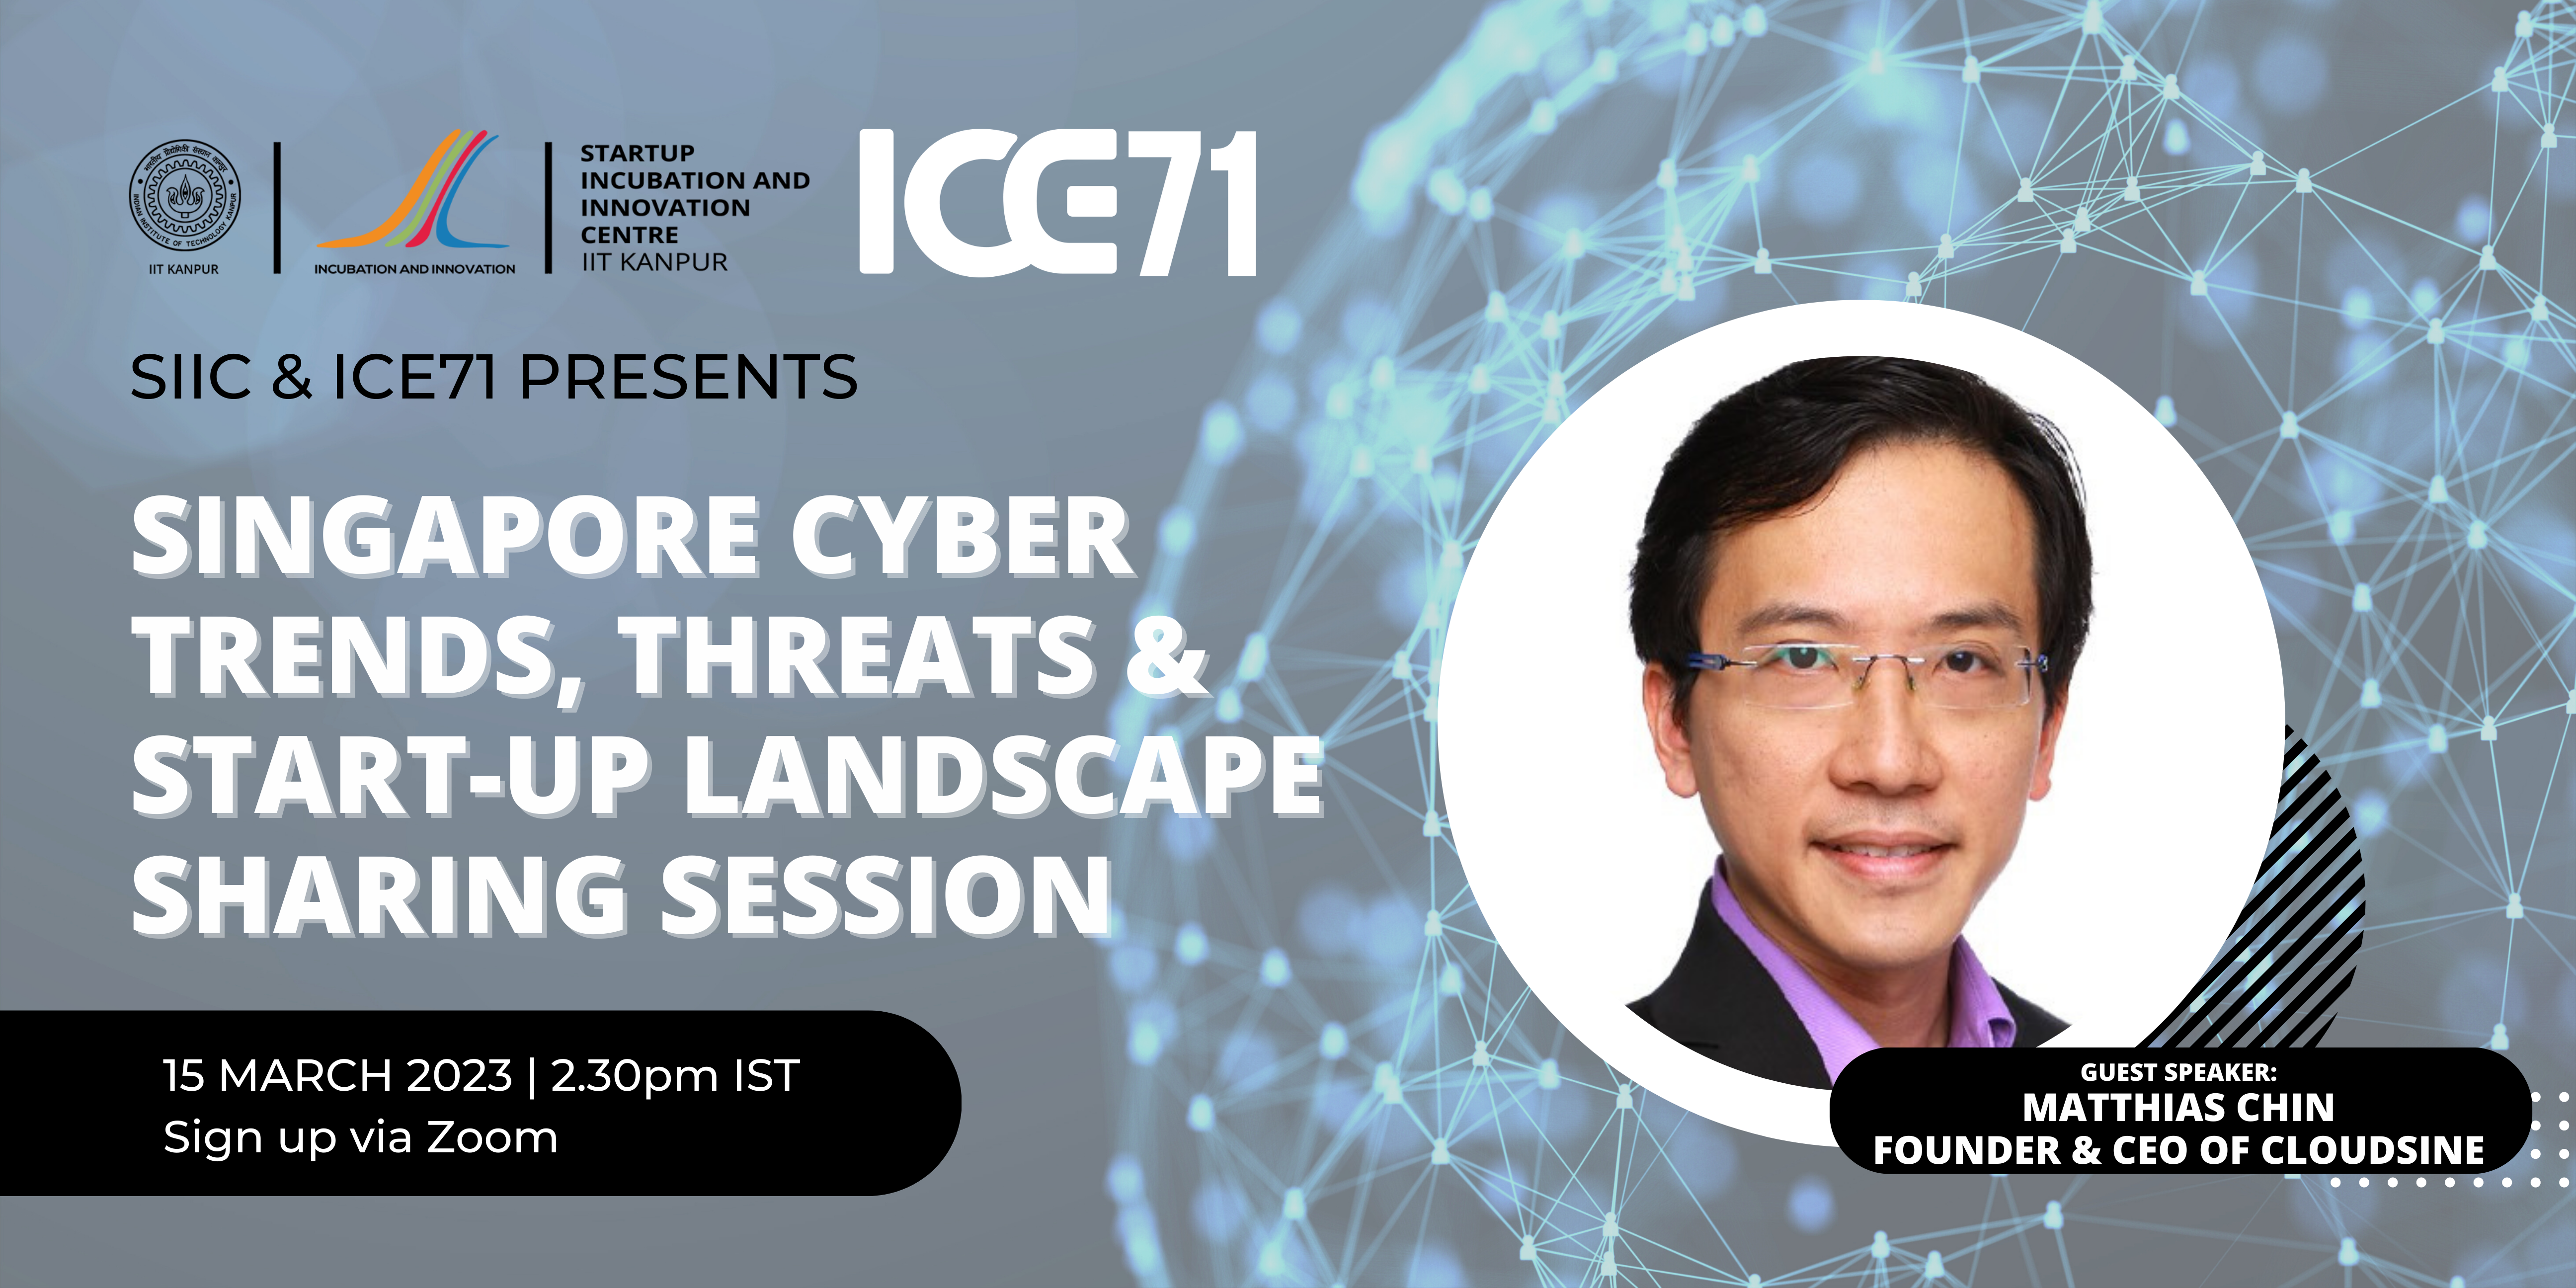 Singapore Cyber Trends, Threats & Start-up Landscape Sharing Session with SIIC